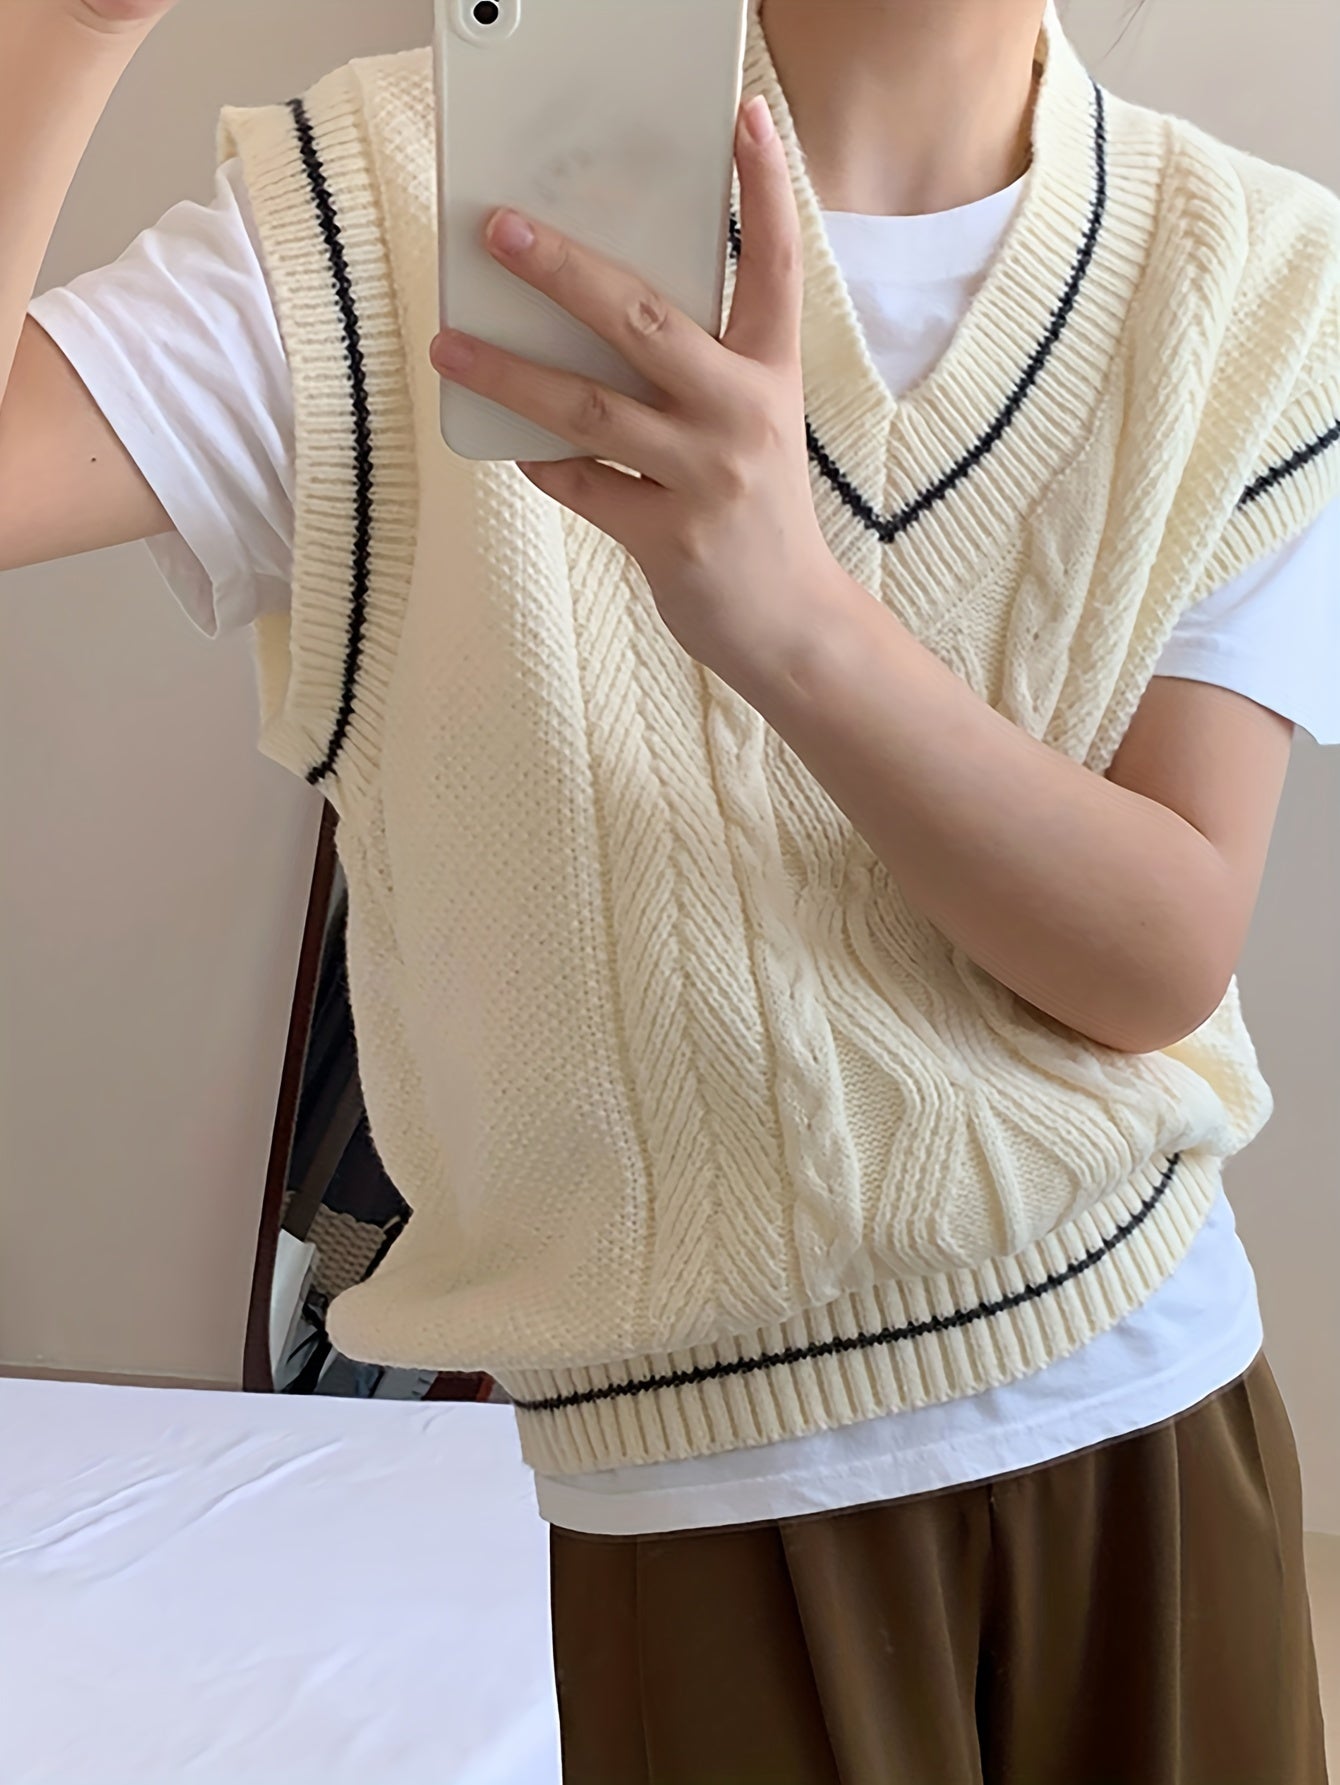 Antmvs Versatile V Neck Cable Knit Vest, Casual Sleeveless Fashion Sweater, Women's Clothing